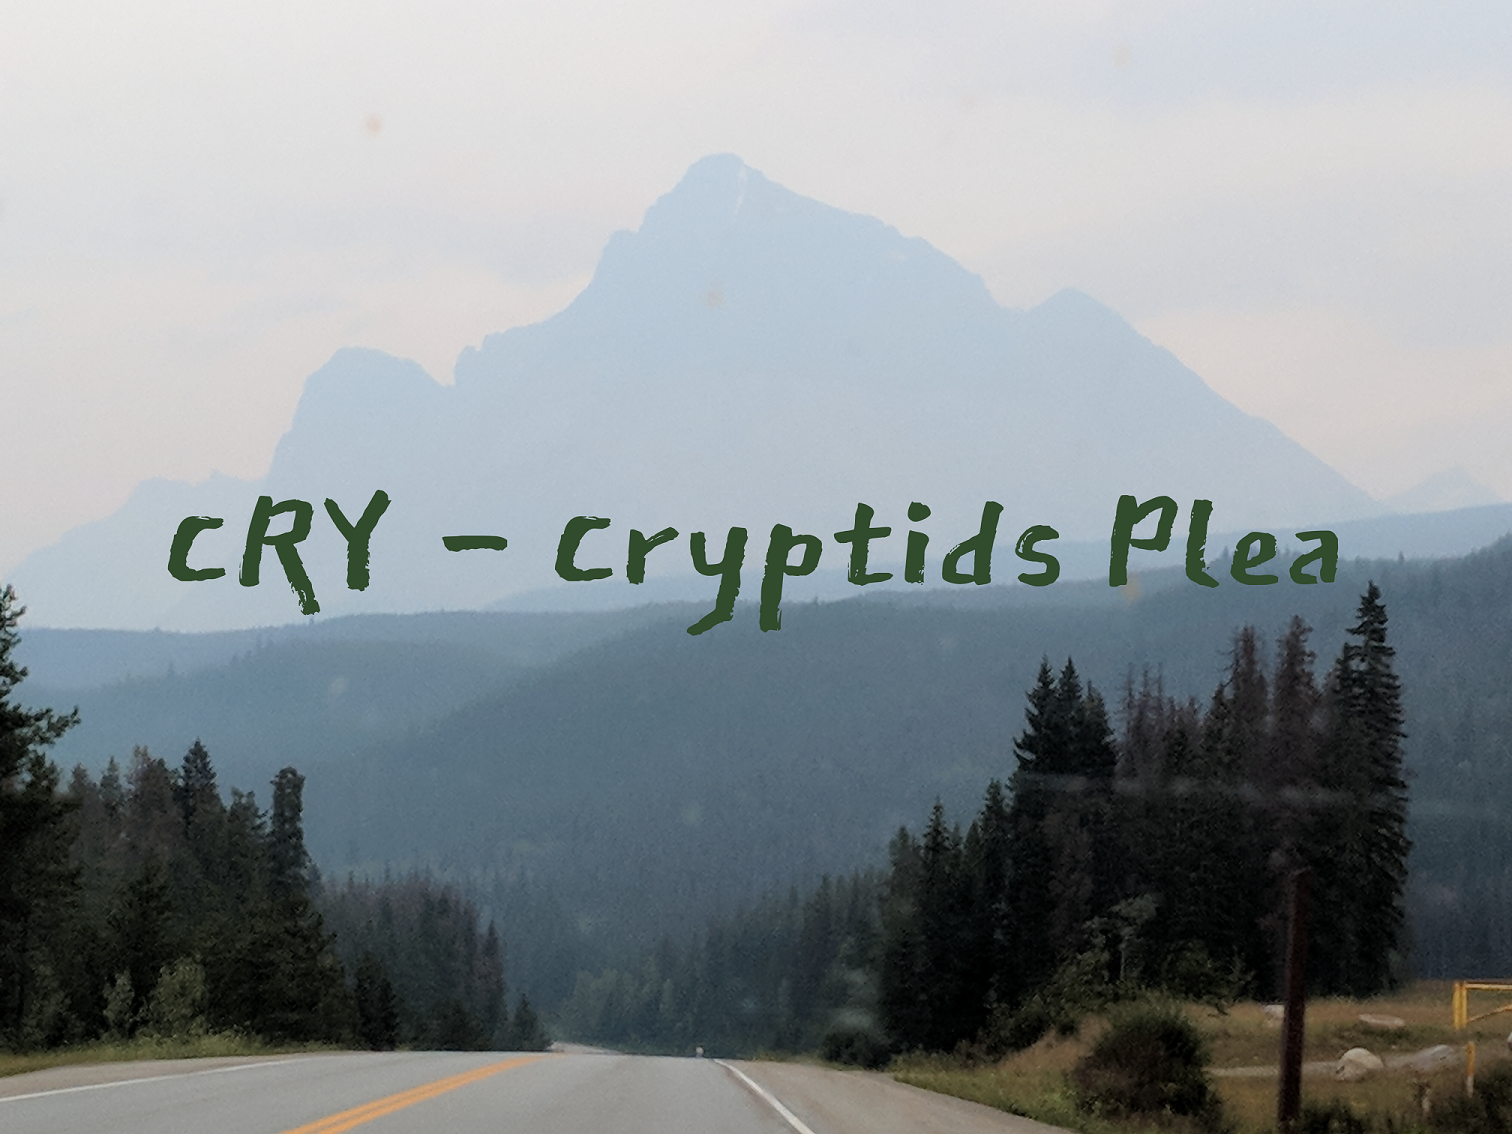 Cry - Cryptid